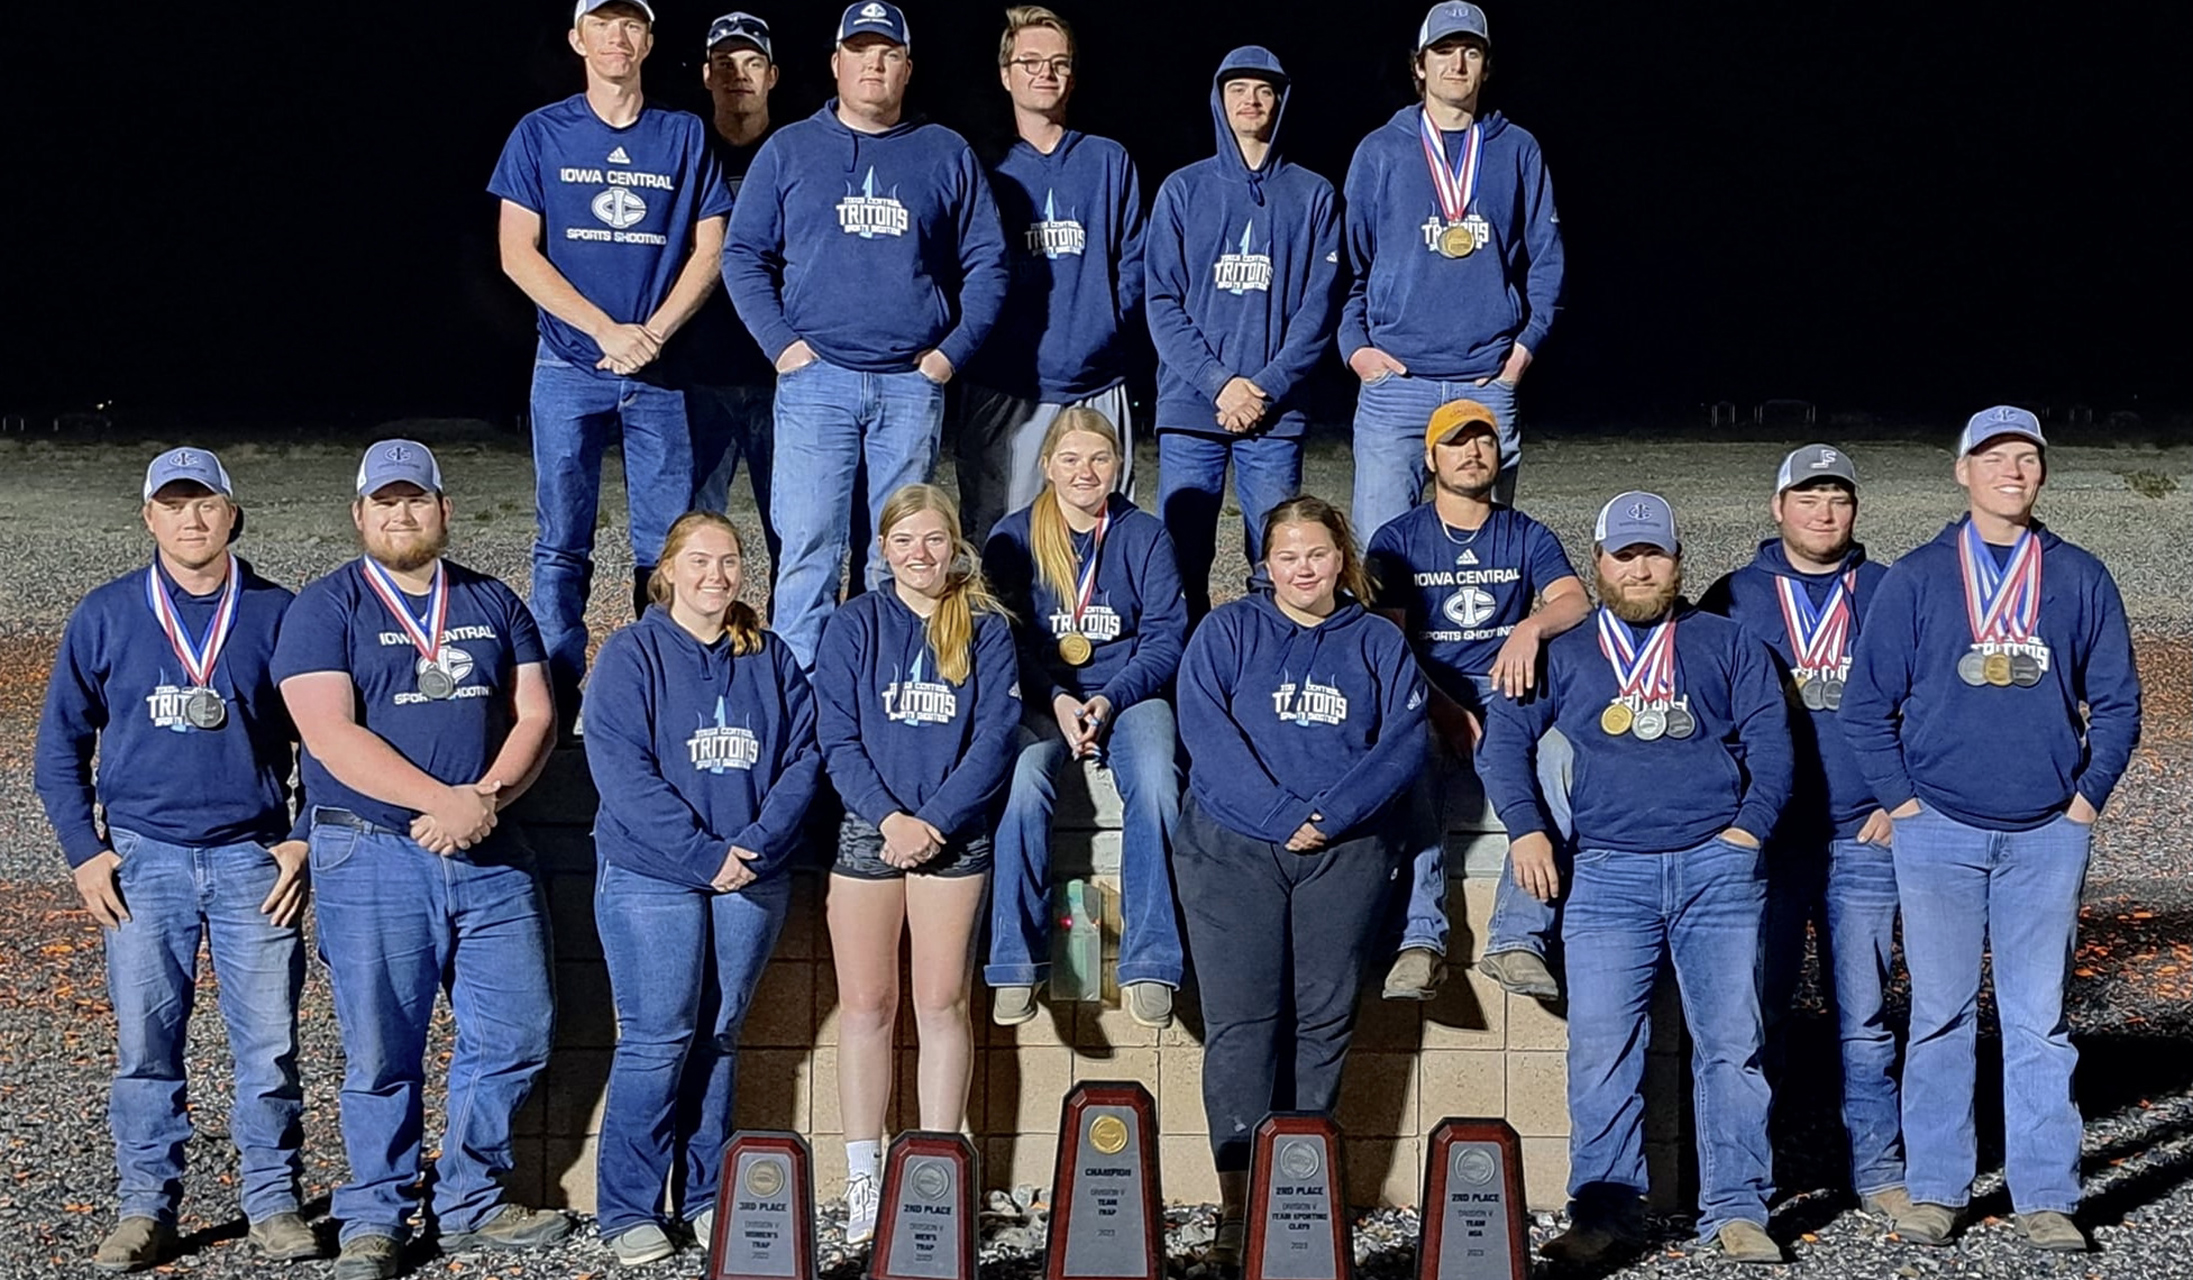 The Iowa Central Sports Shooting Team brought home several national champions and finished national runners up as a team. 